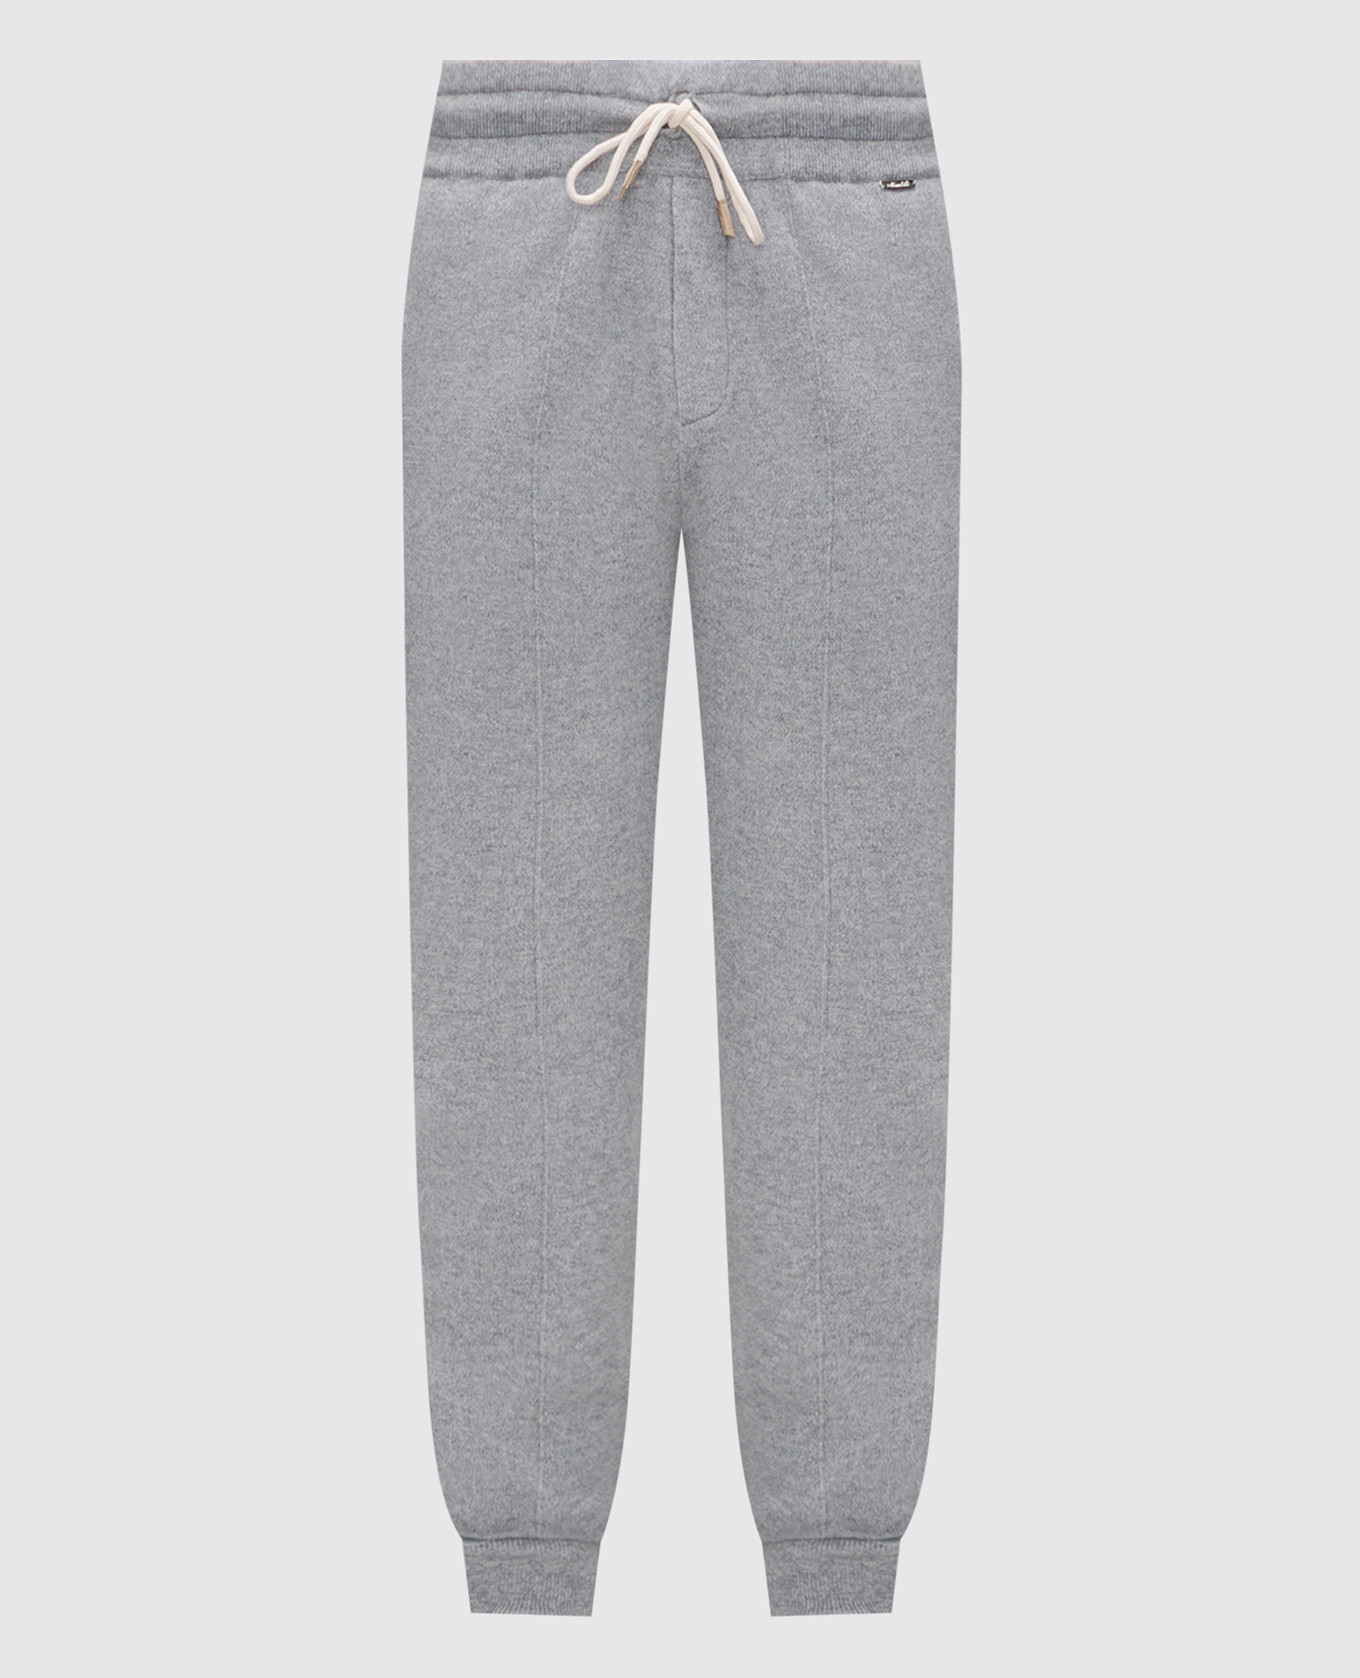 Gray cashmere joggers